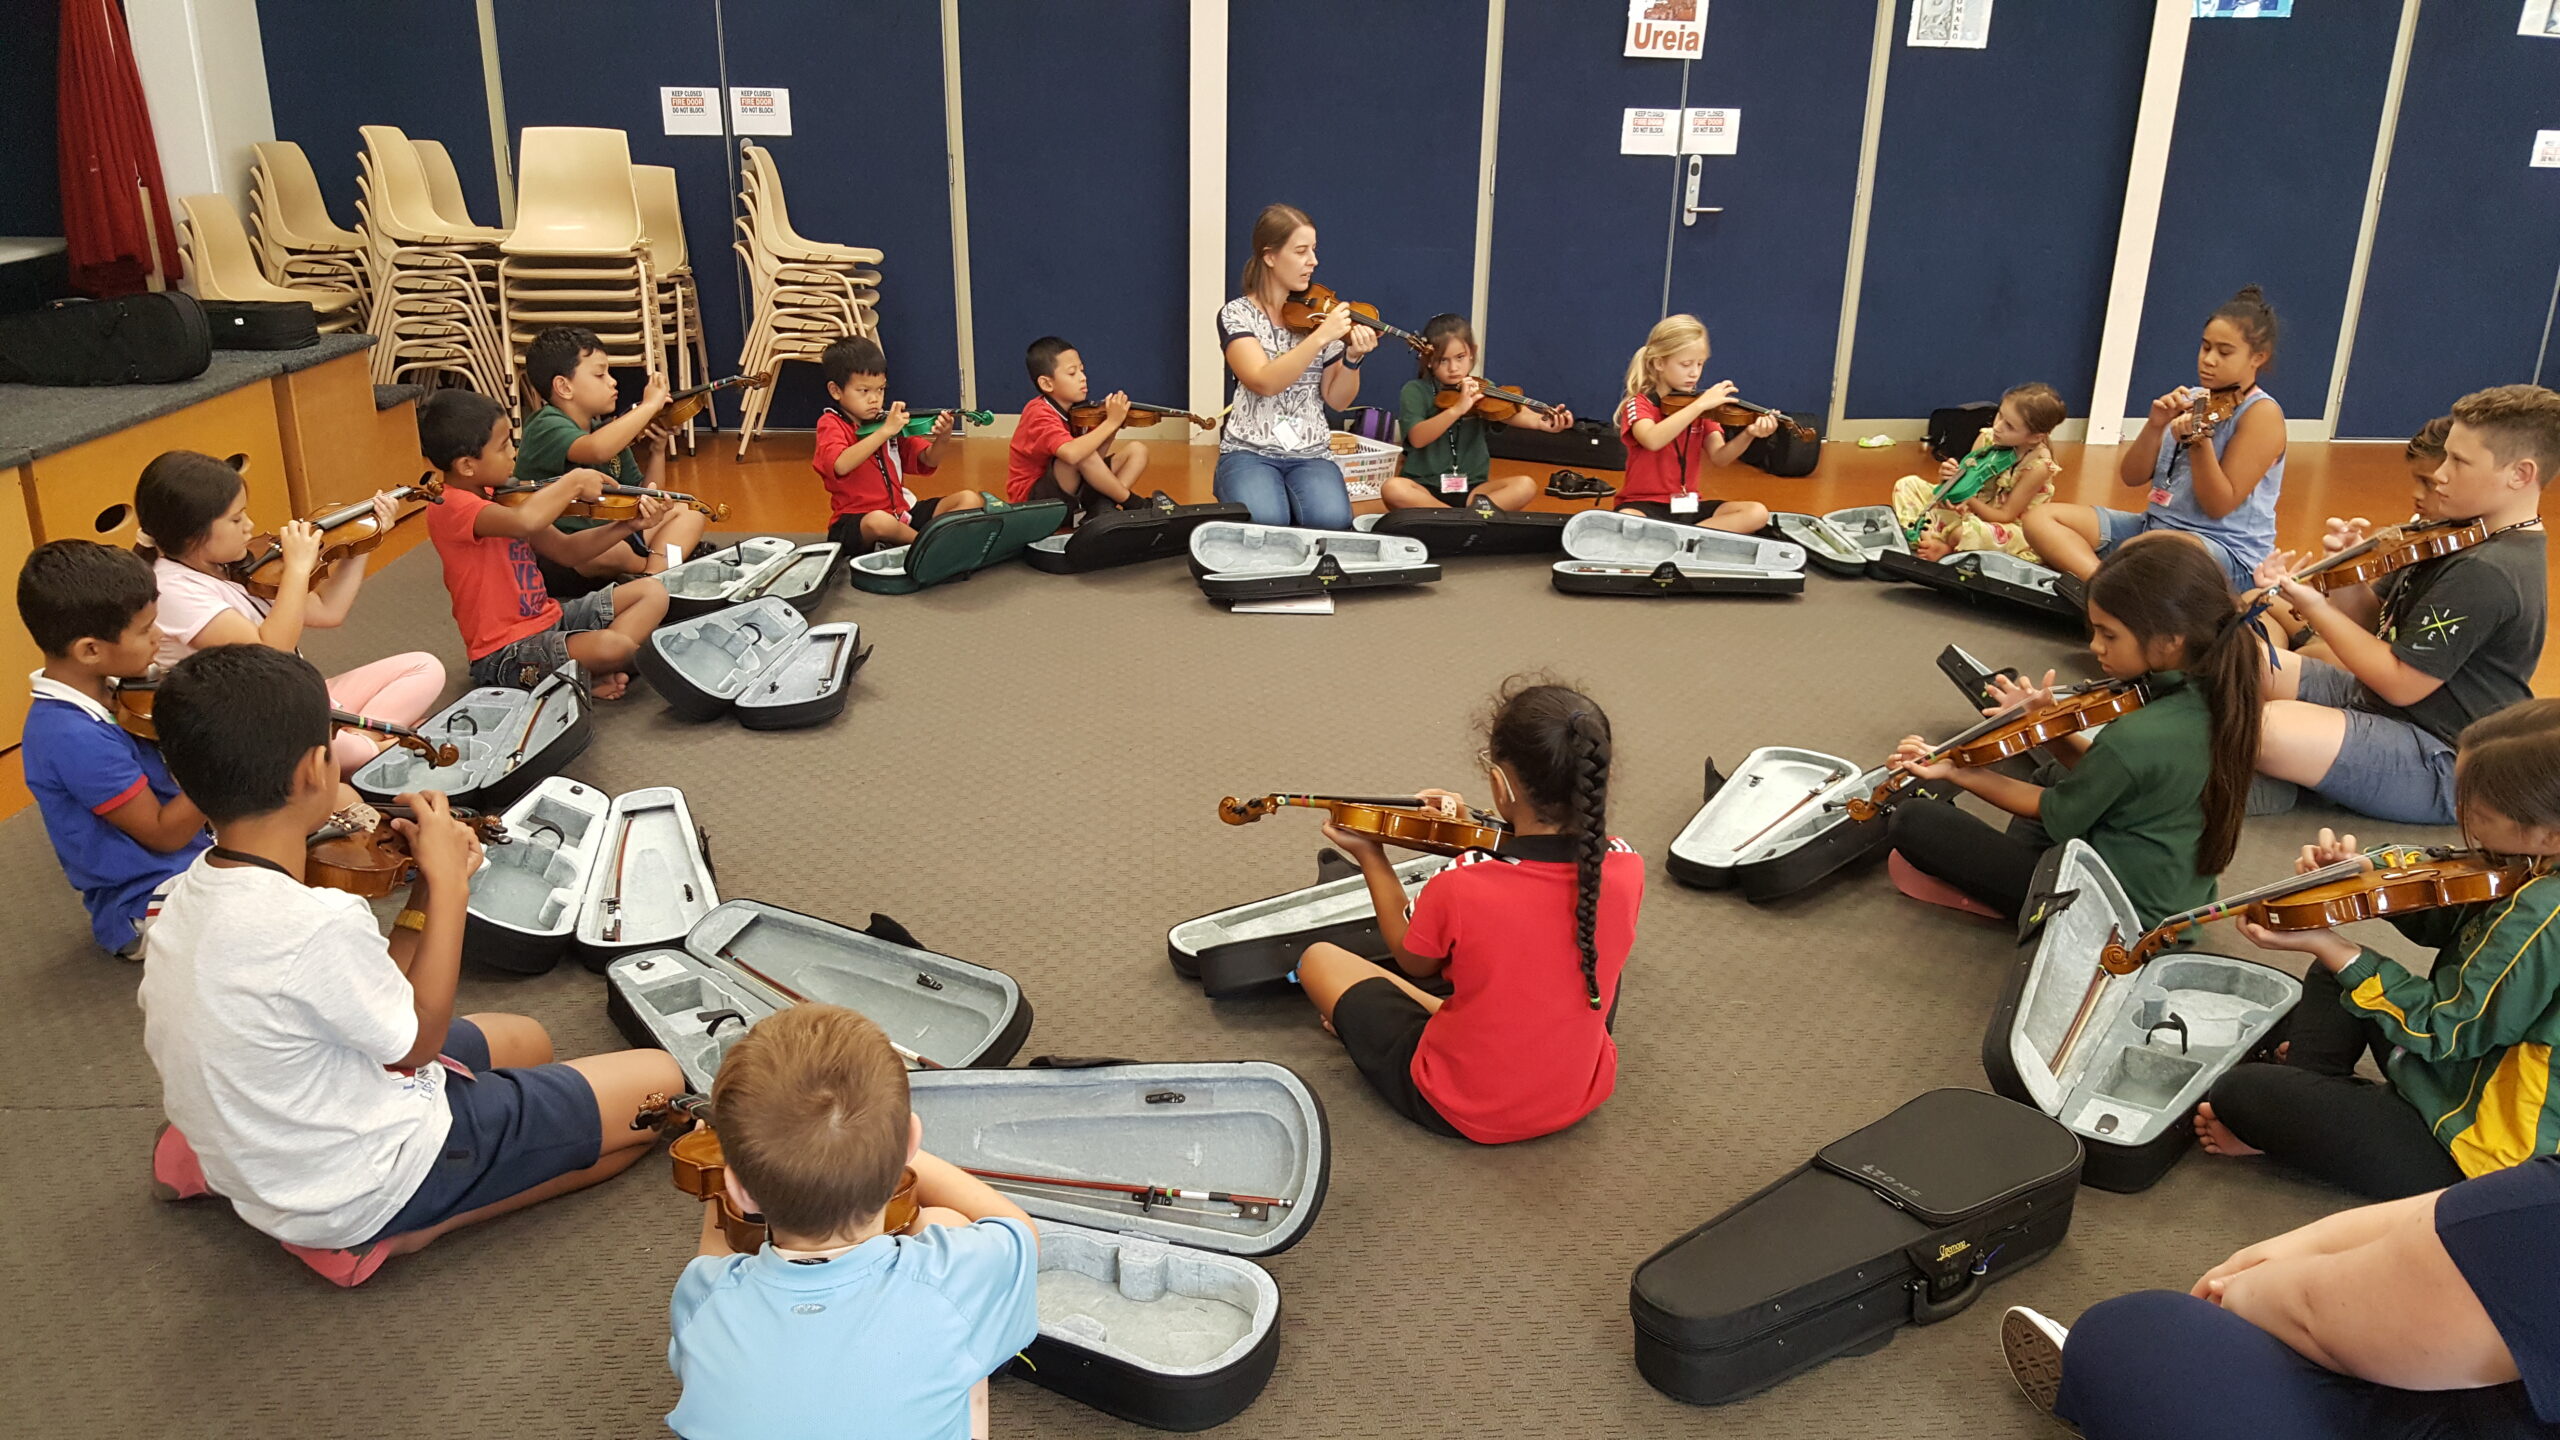 A group of children sitting in a circle on the floor holding violins, with a teacher explaining in the front middle.